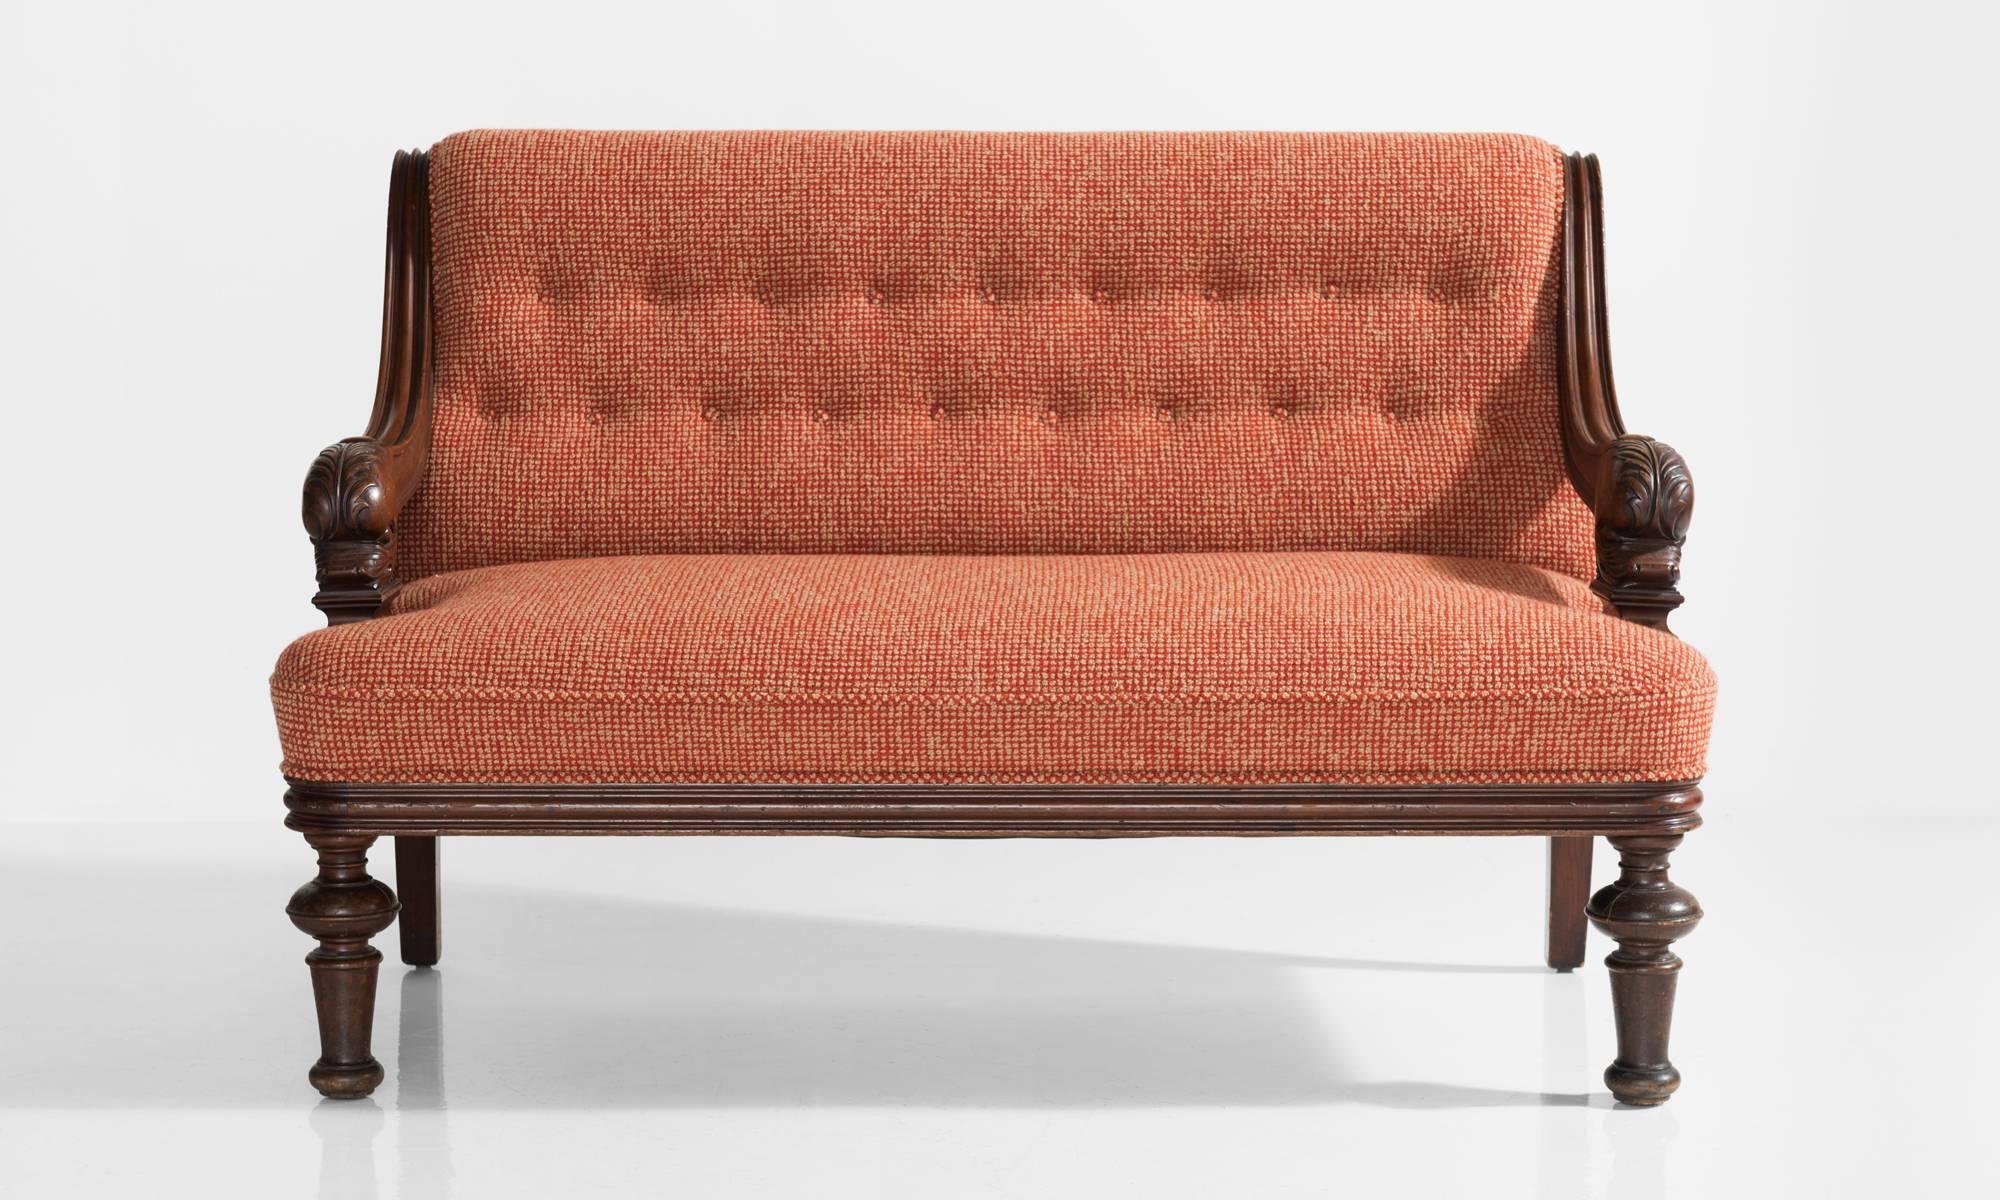 Curious Mahogany Napoleon & Wool Napoleon sofa, France, circa 1890.

Carved armrests with dolphin head motif, newly upholstered in Maharam wool fabric.